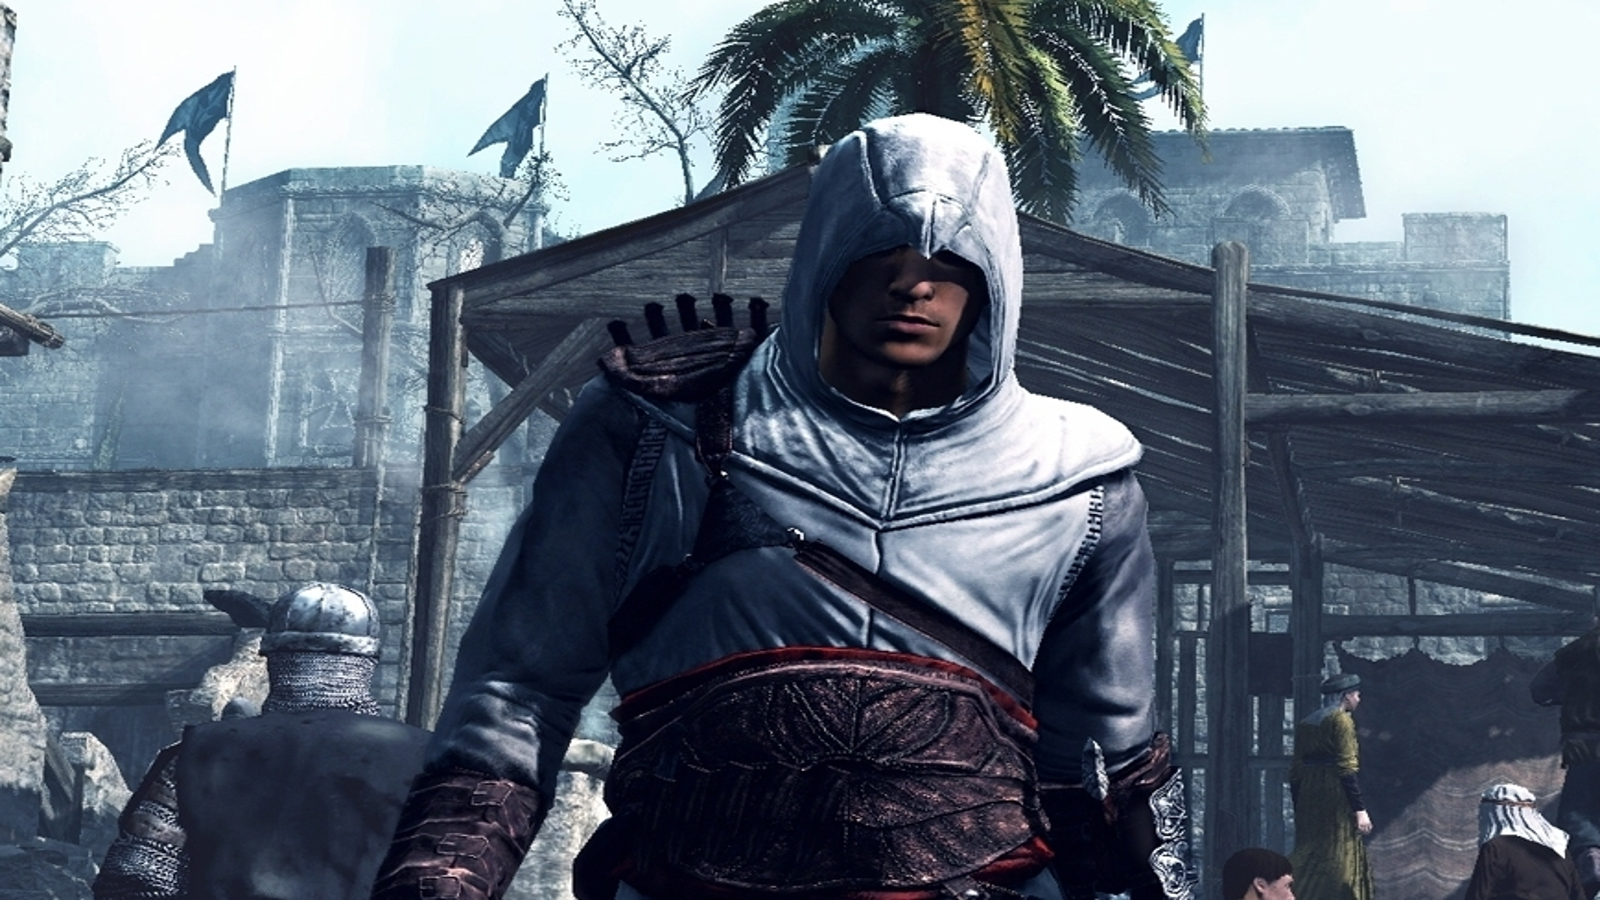 Assassin's Creed Publisher Throws 800 More Devs At Franchise